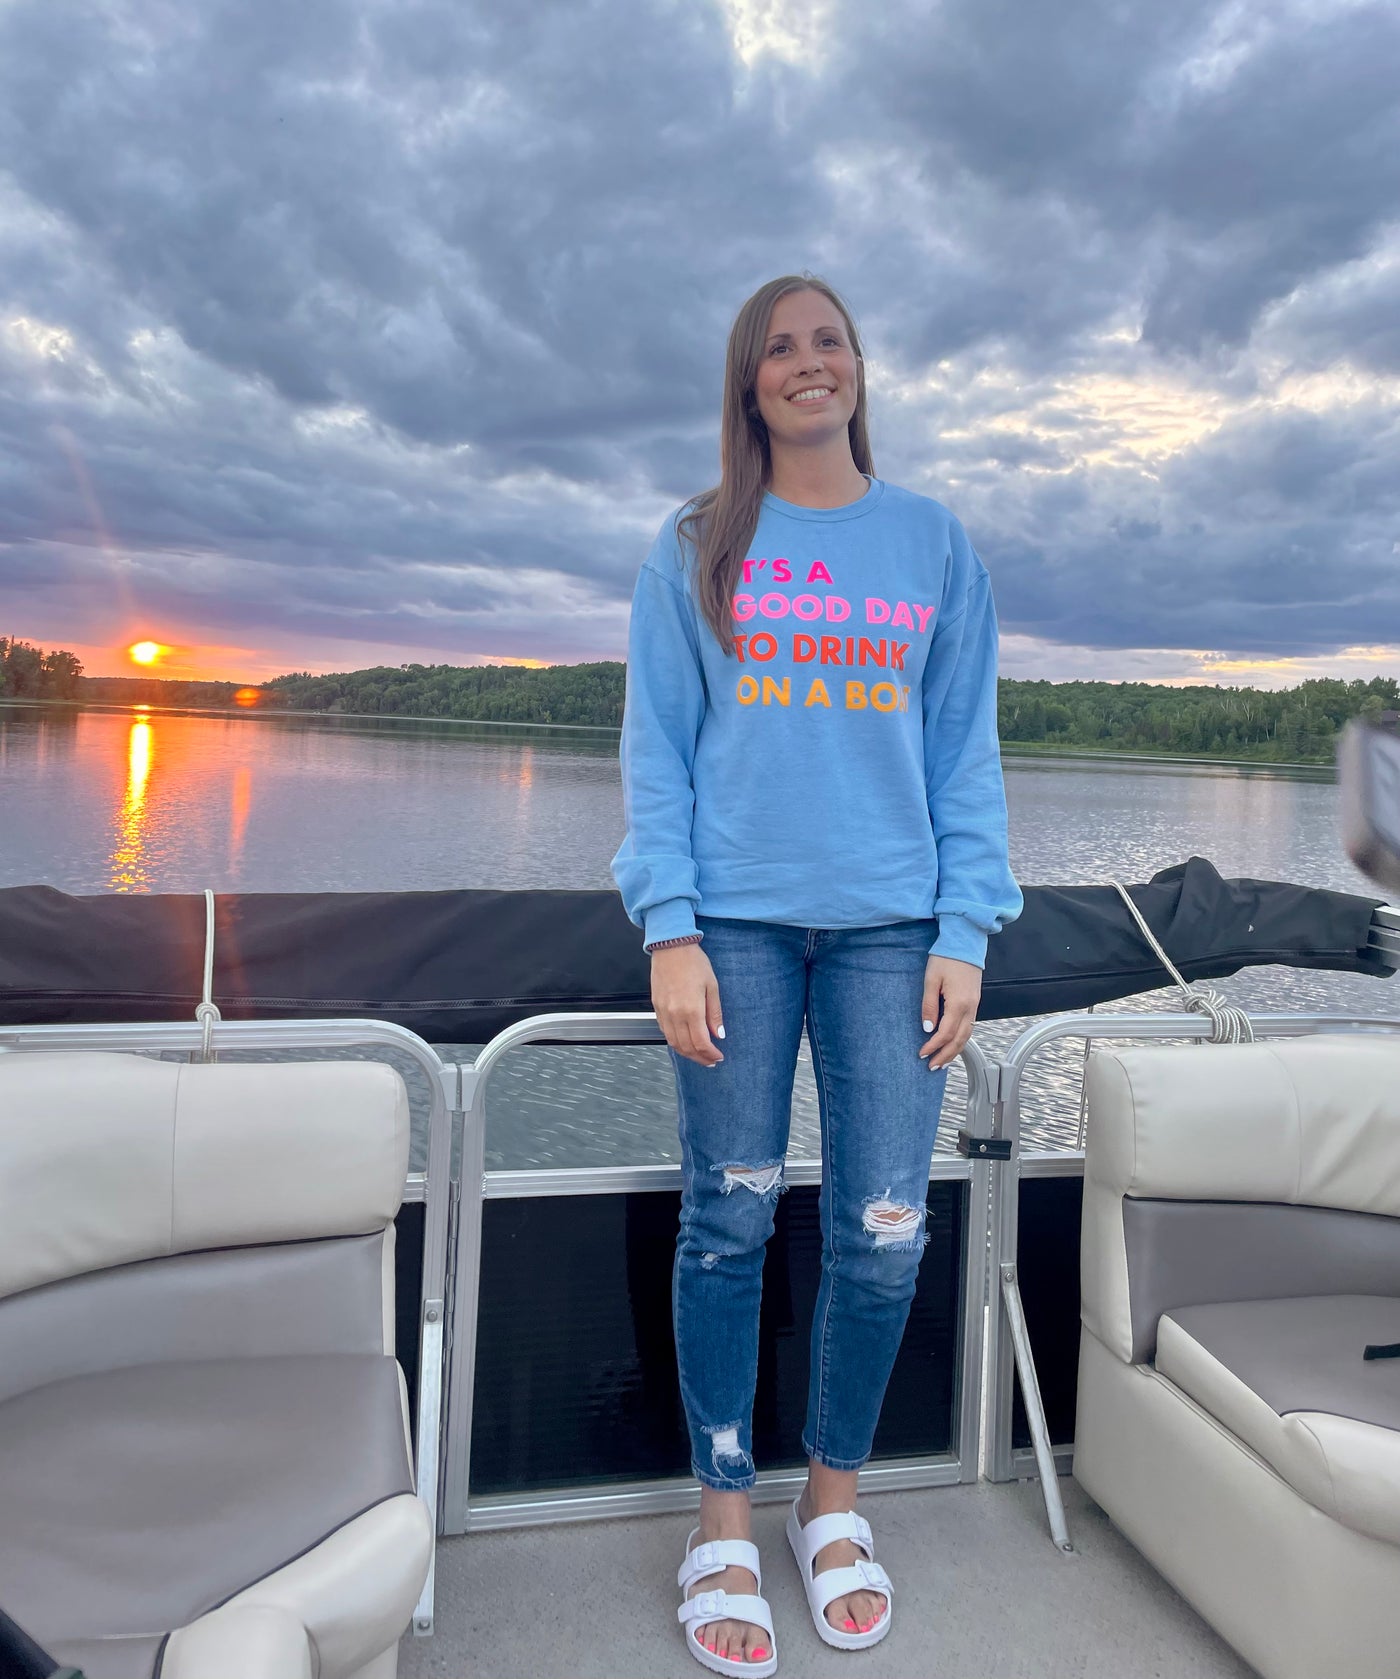 It’s A Good Day To Drink On A Boat Sweatshirt